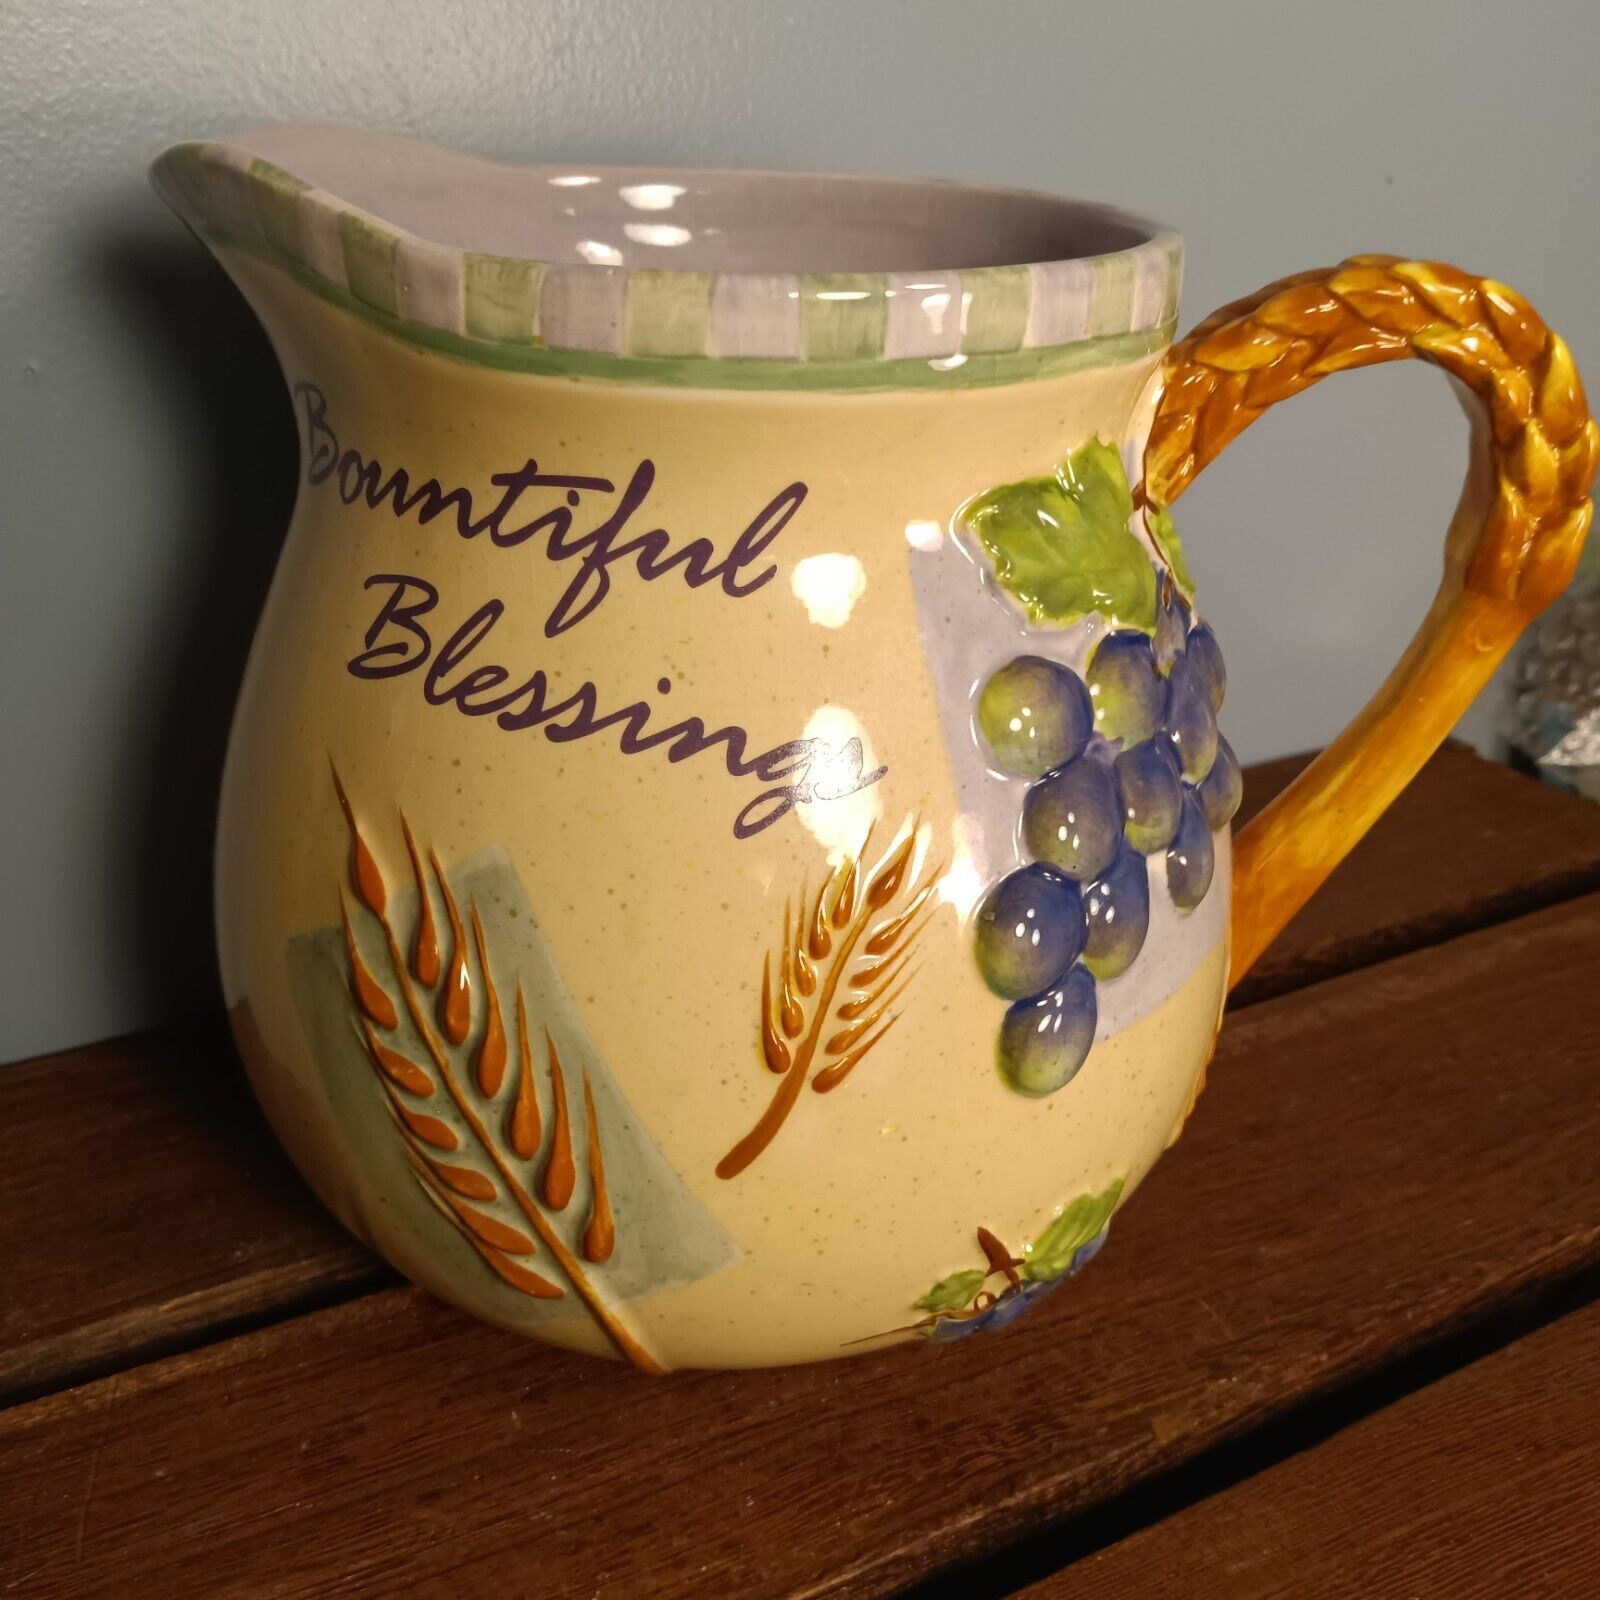 Vintage Ceramic Pitcher, Bountiful Blessings, Bible Quote, Colorful